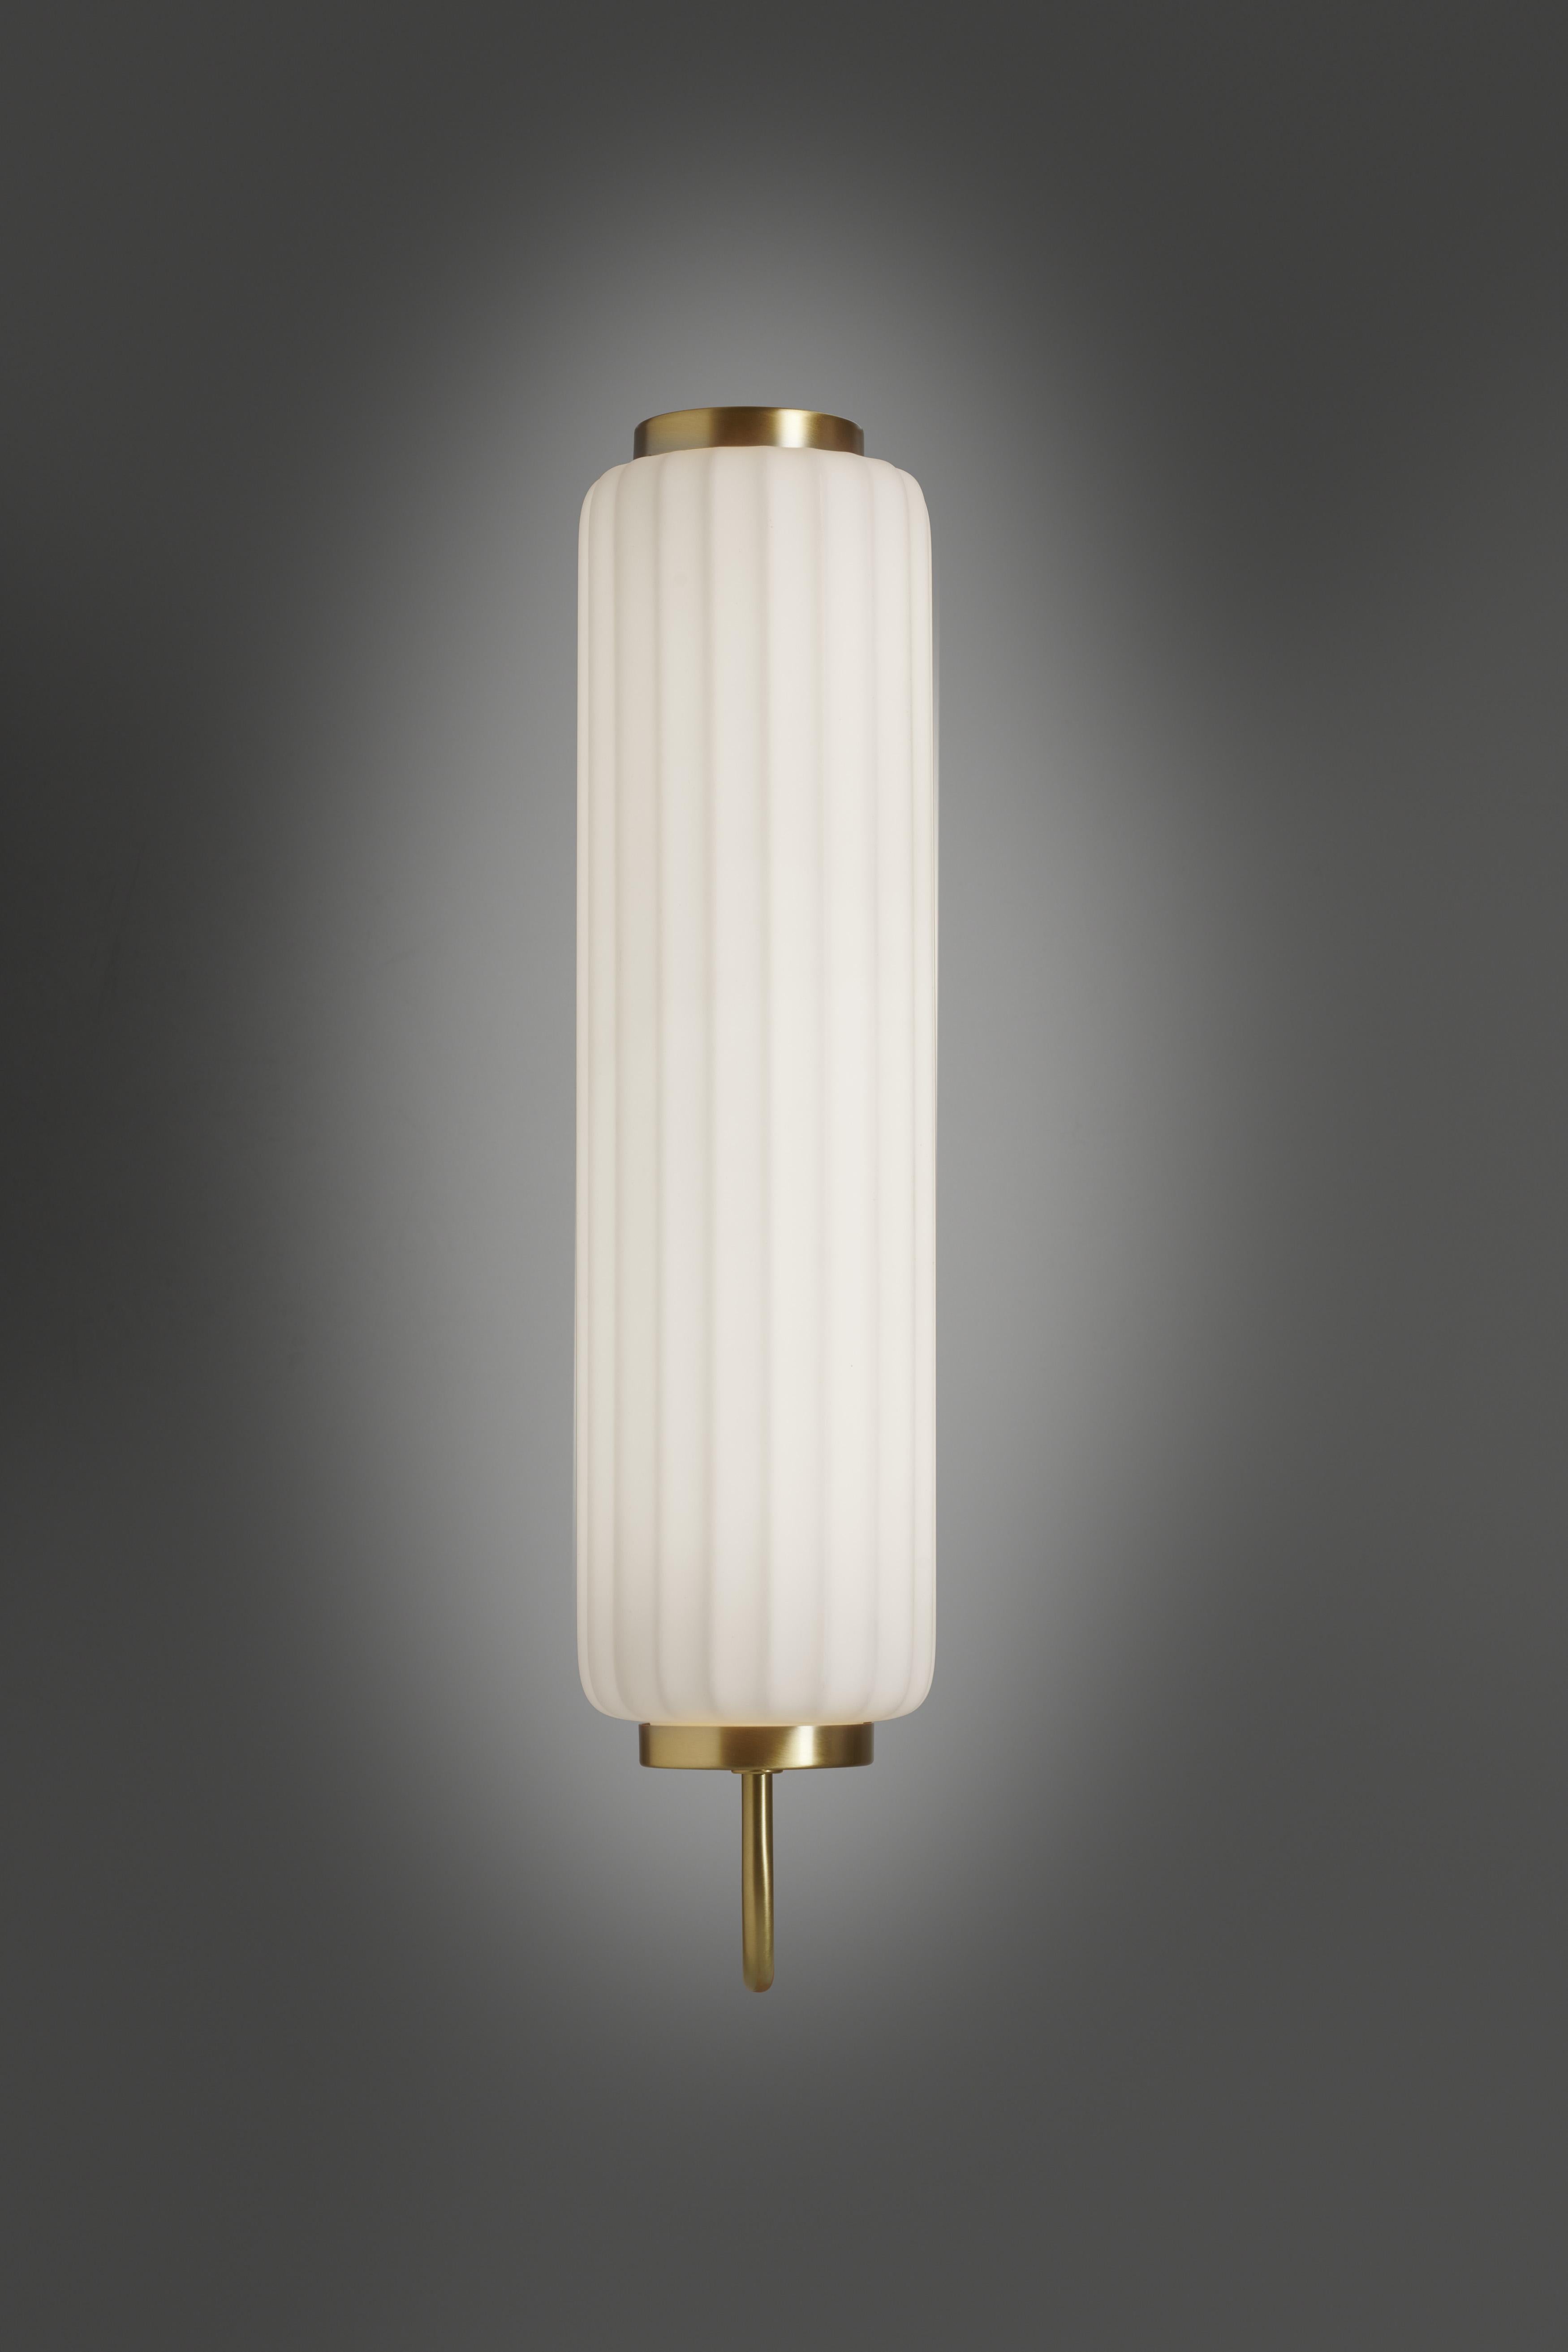 Cordiale Applique reminds of a balance among functional, technical and aesthetics aspects. The line, essential and embellished by the brass finishing, is a tribute to Art Déco, with all the contemporaneity of polyethylene. The lamp is available in